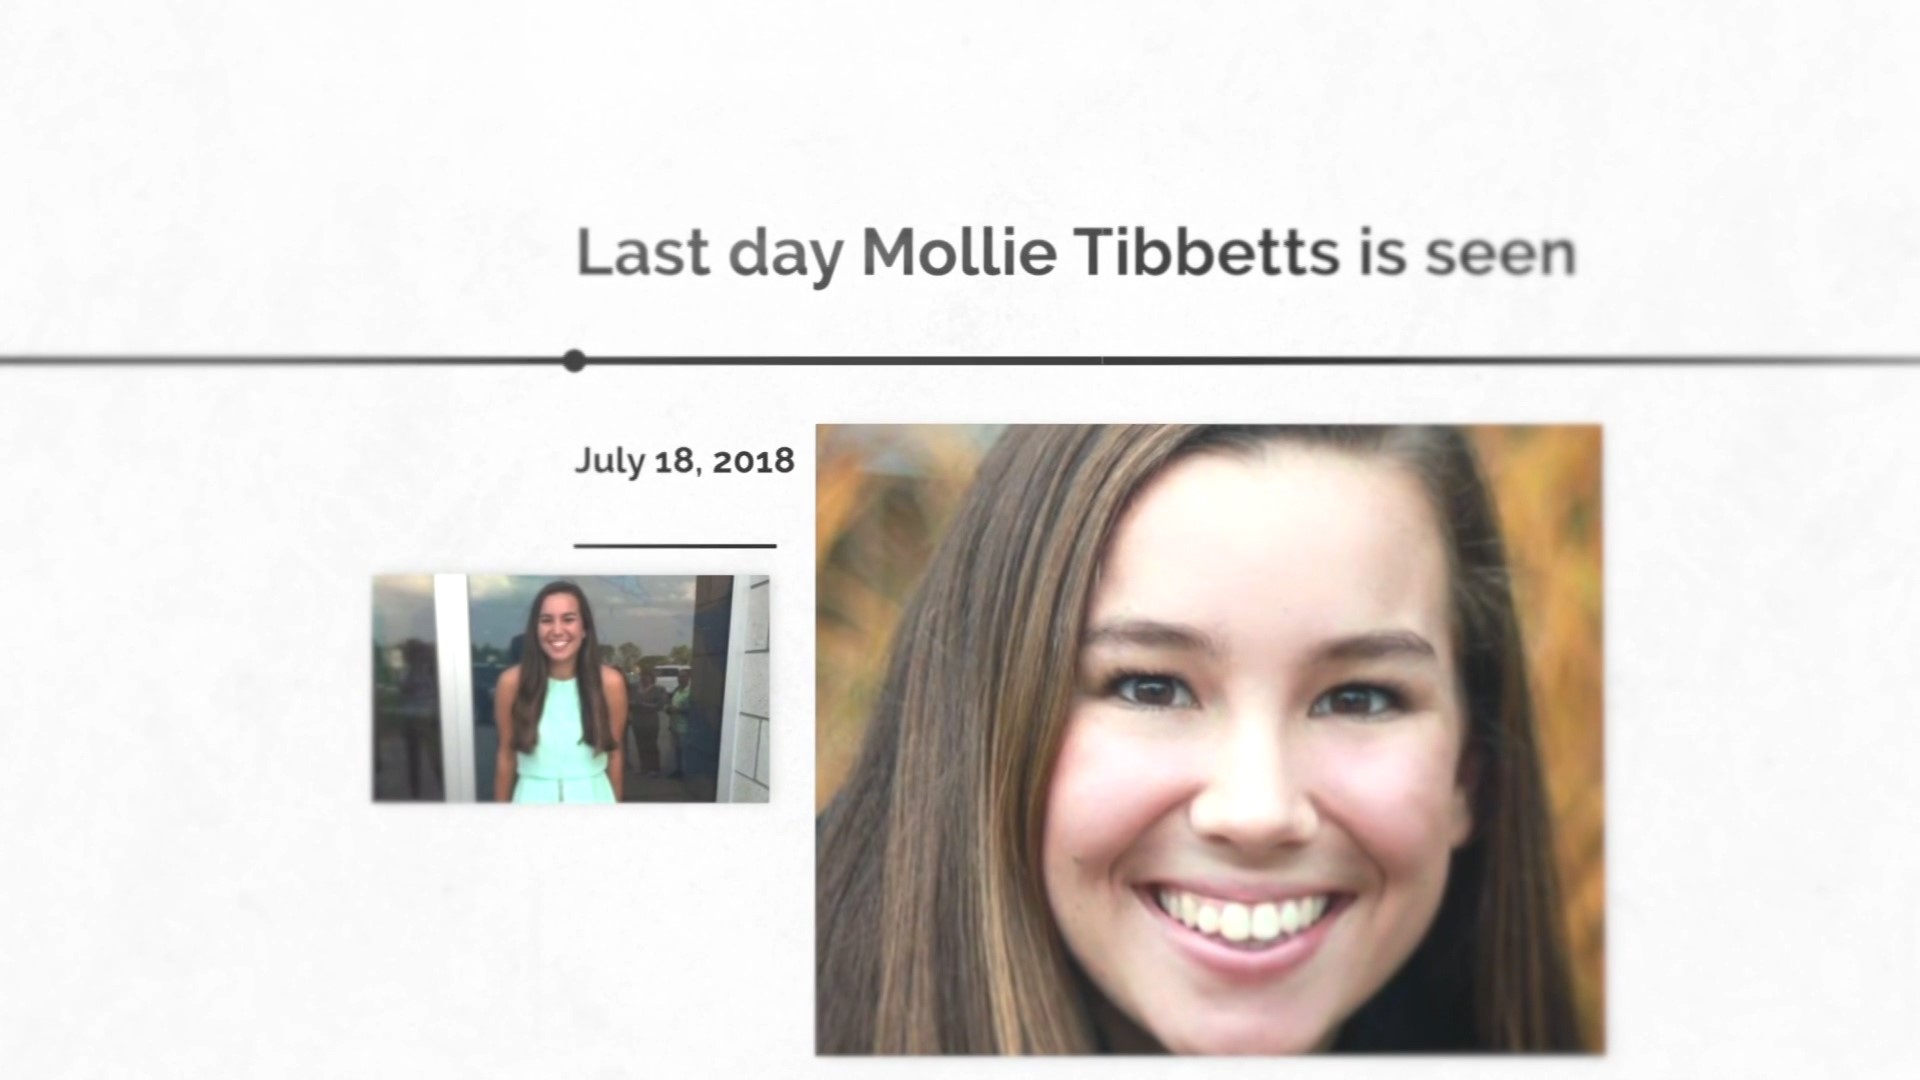 Cristhian Bahena Rivera, the man accused of killing Mollie Tibbetts, will stand trial in Scott County. Here is a timeline of the investigation.